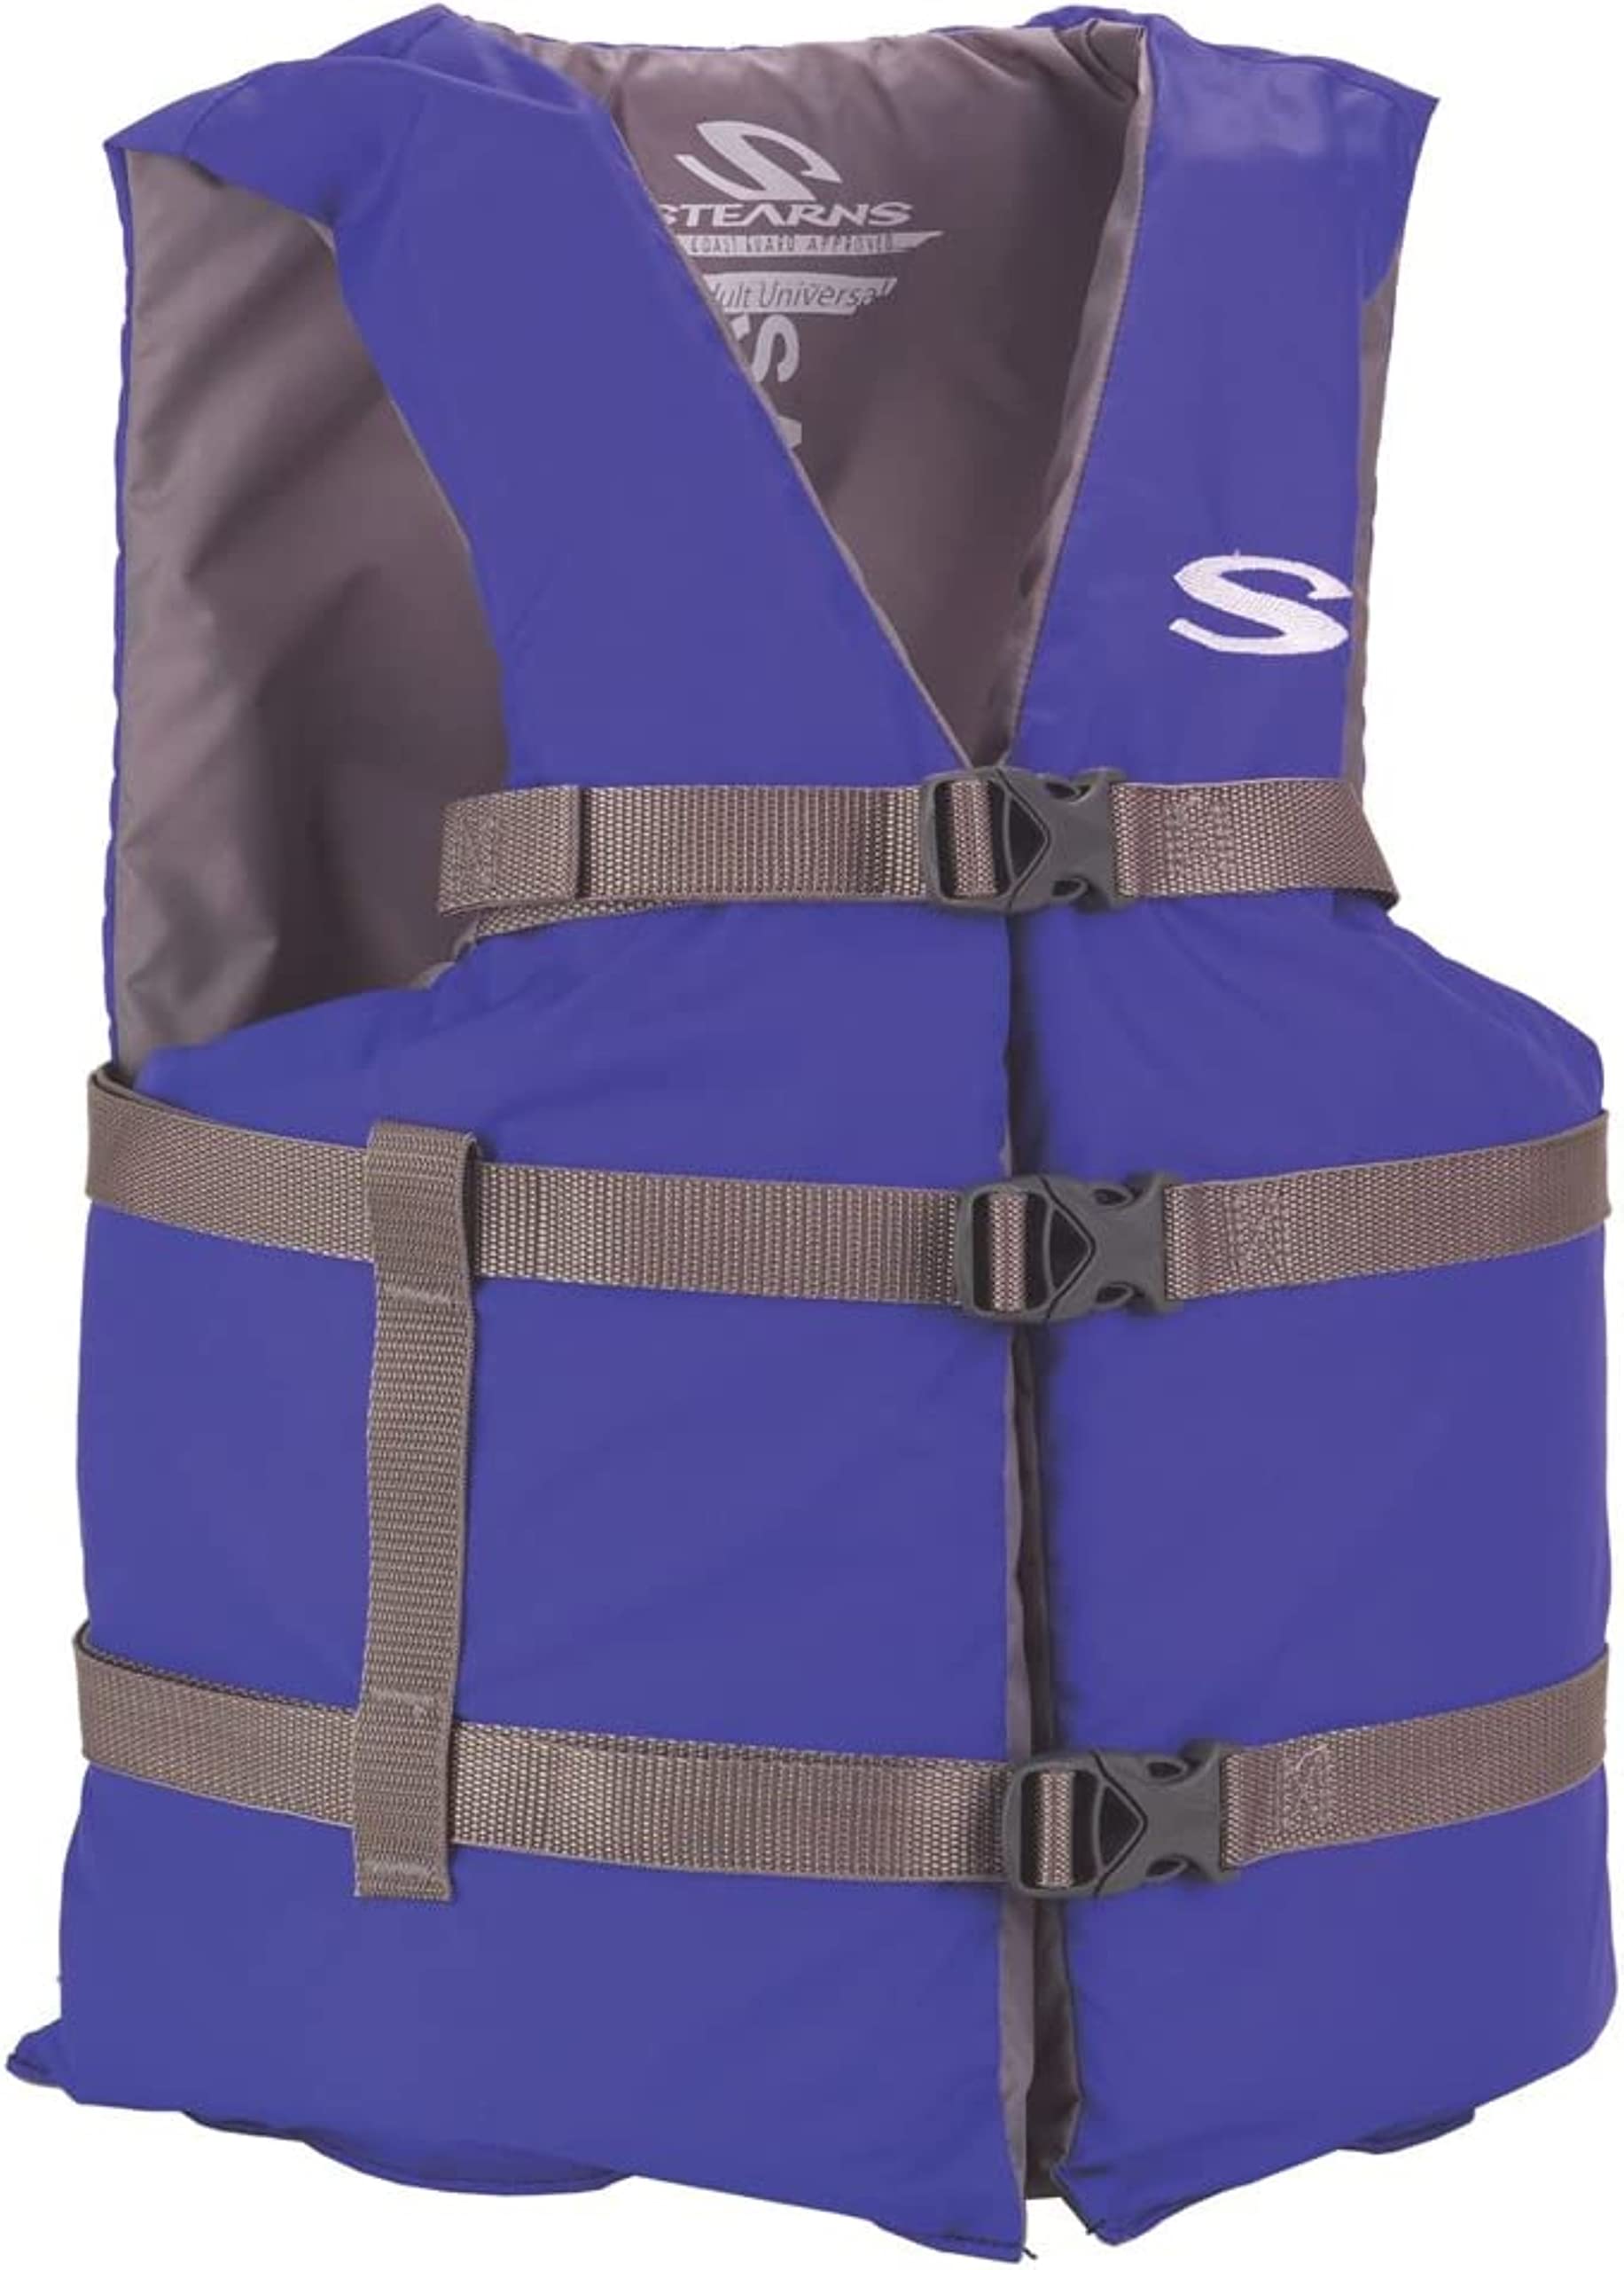 Stearns Adult Classic Series Life Vest, Oversized Fit Blue